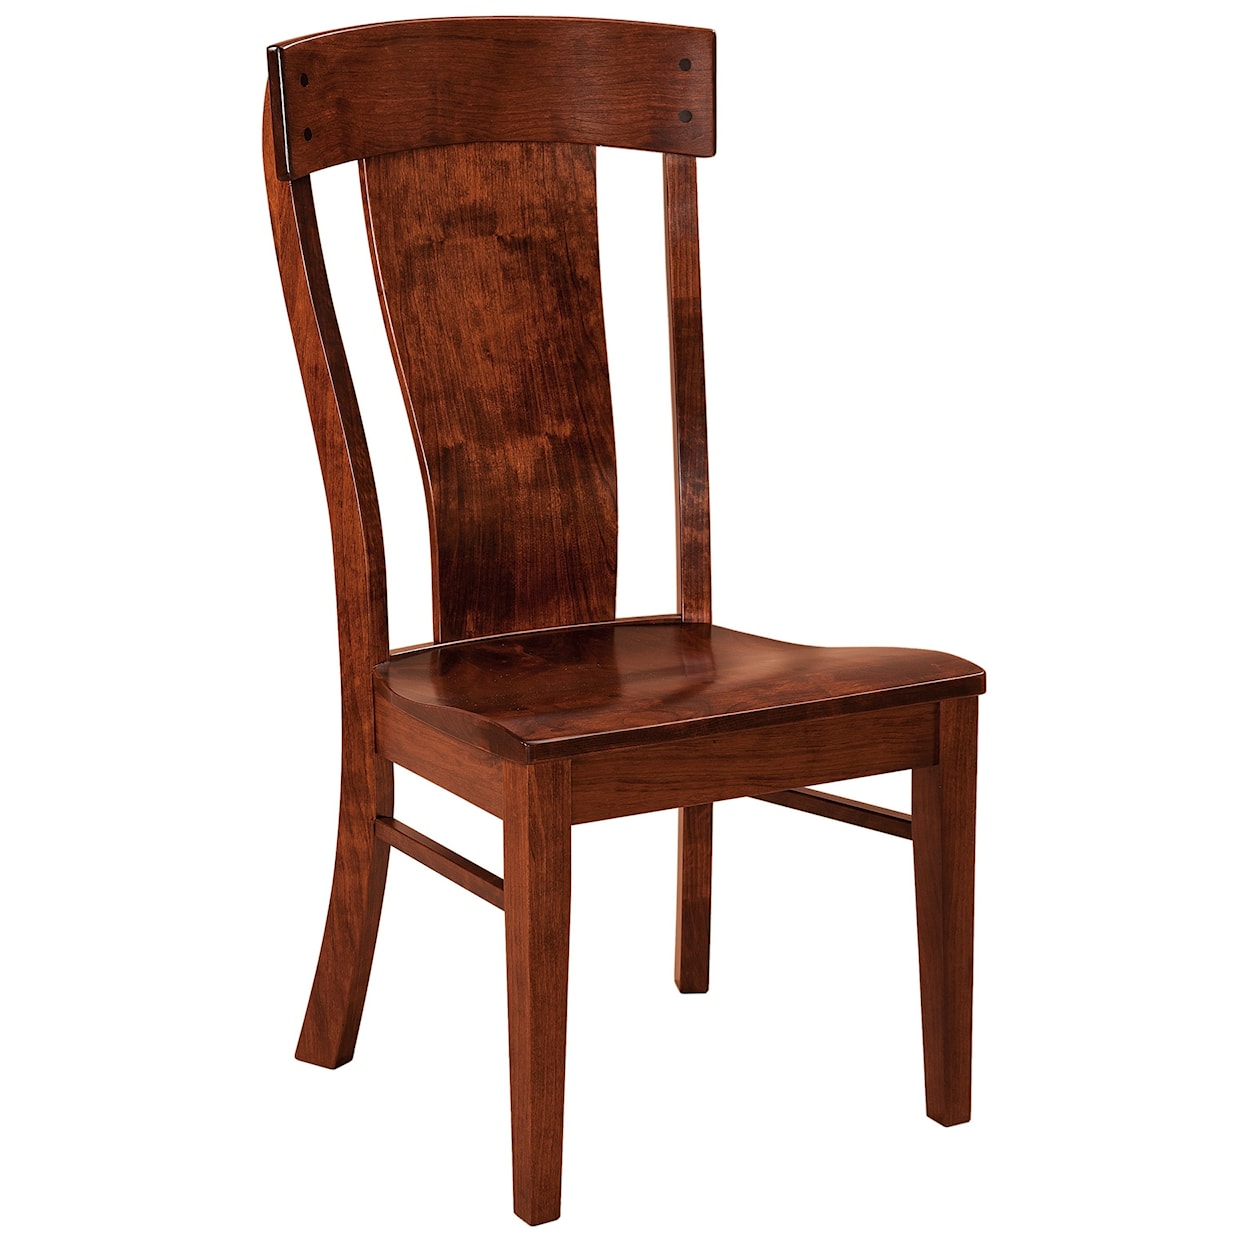 F&N Woodworking Lacombe Side Chair - Wood Seat